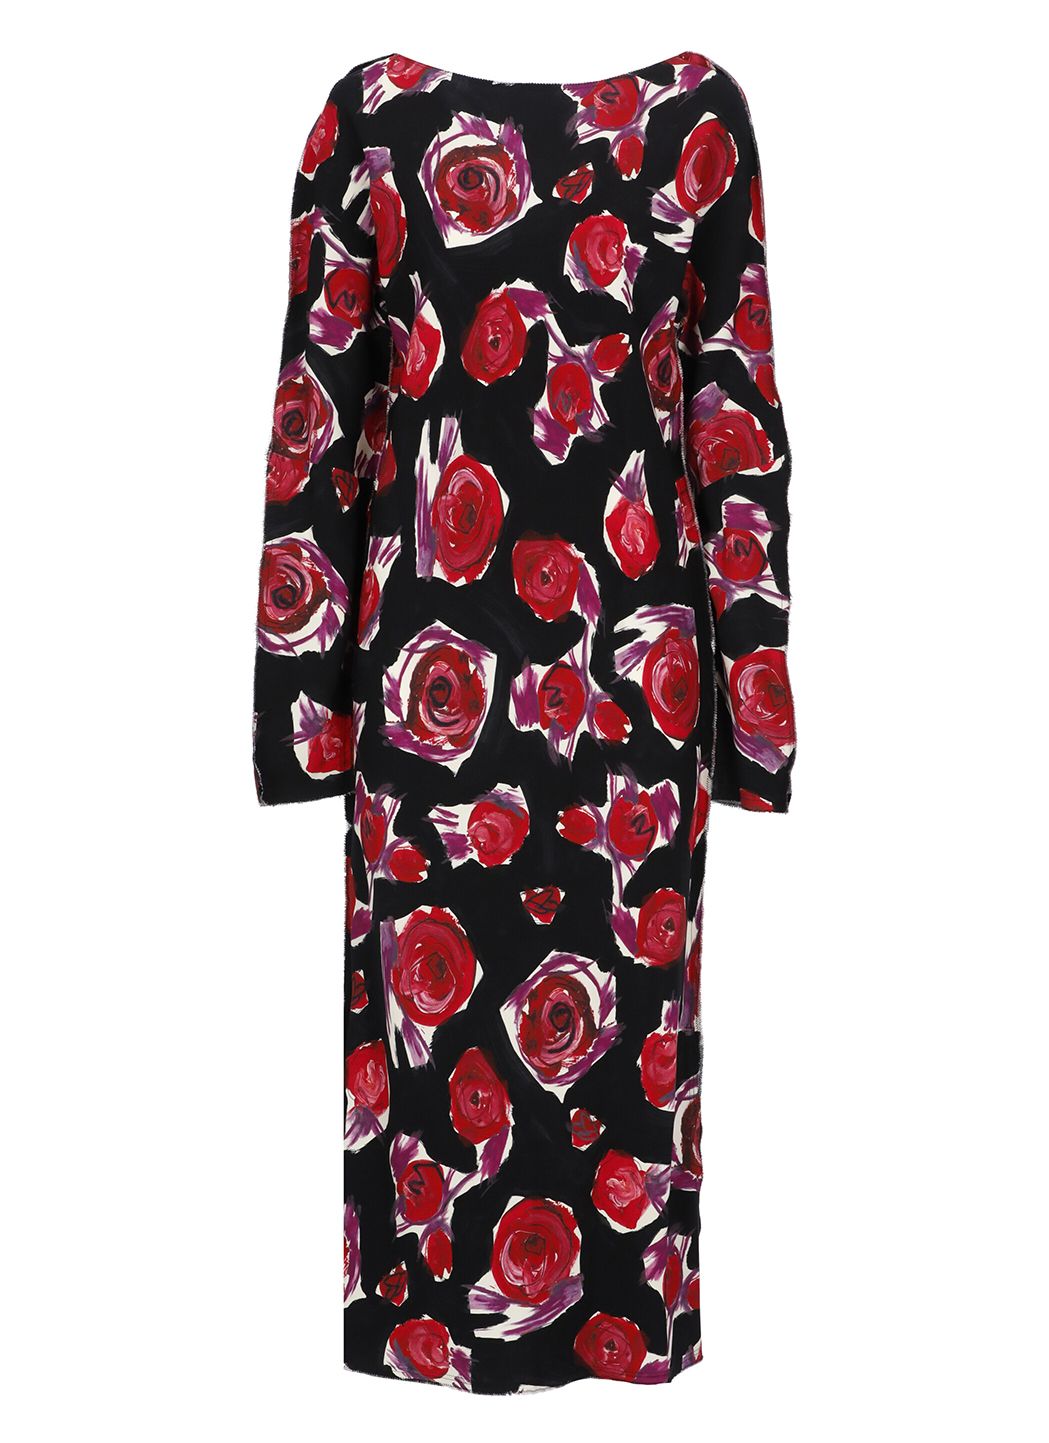 Spinning Roses Cady dress